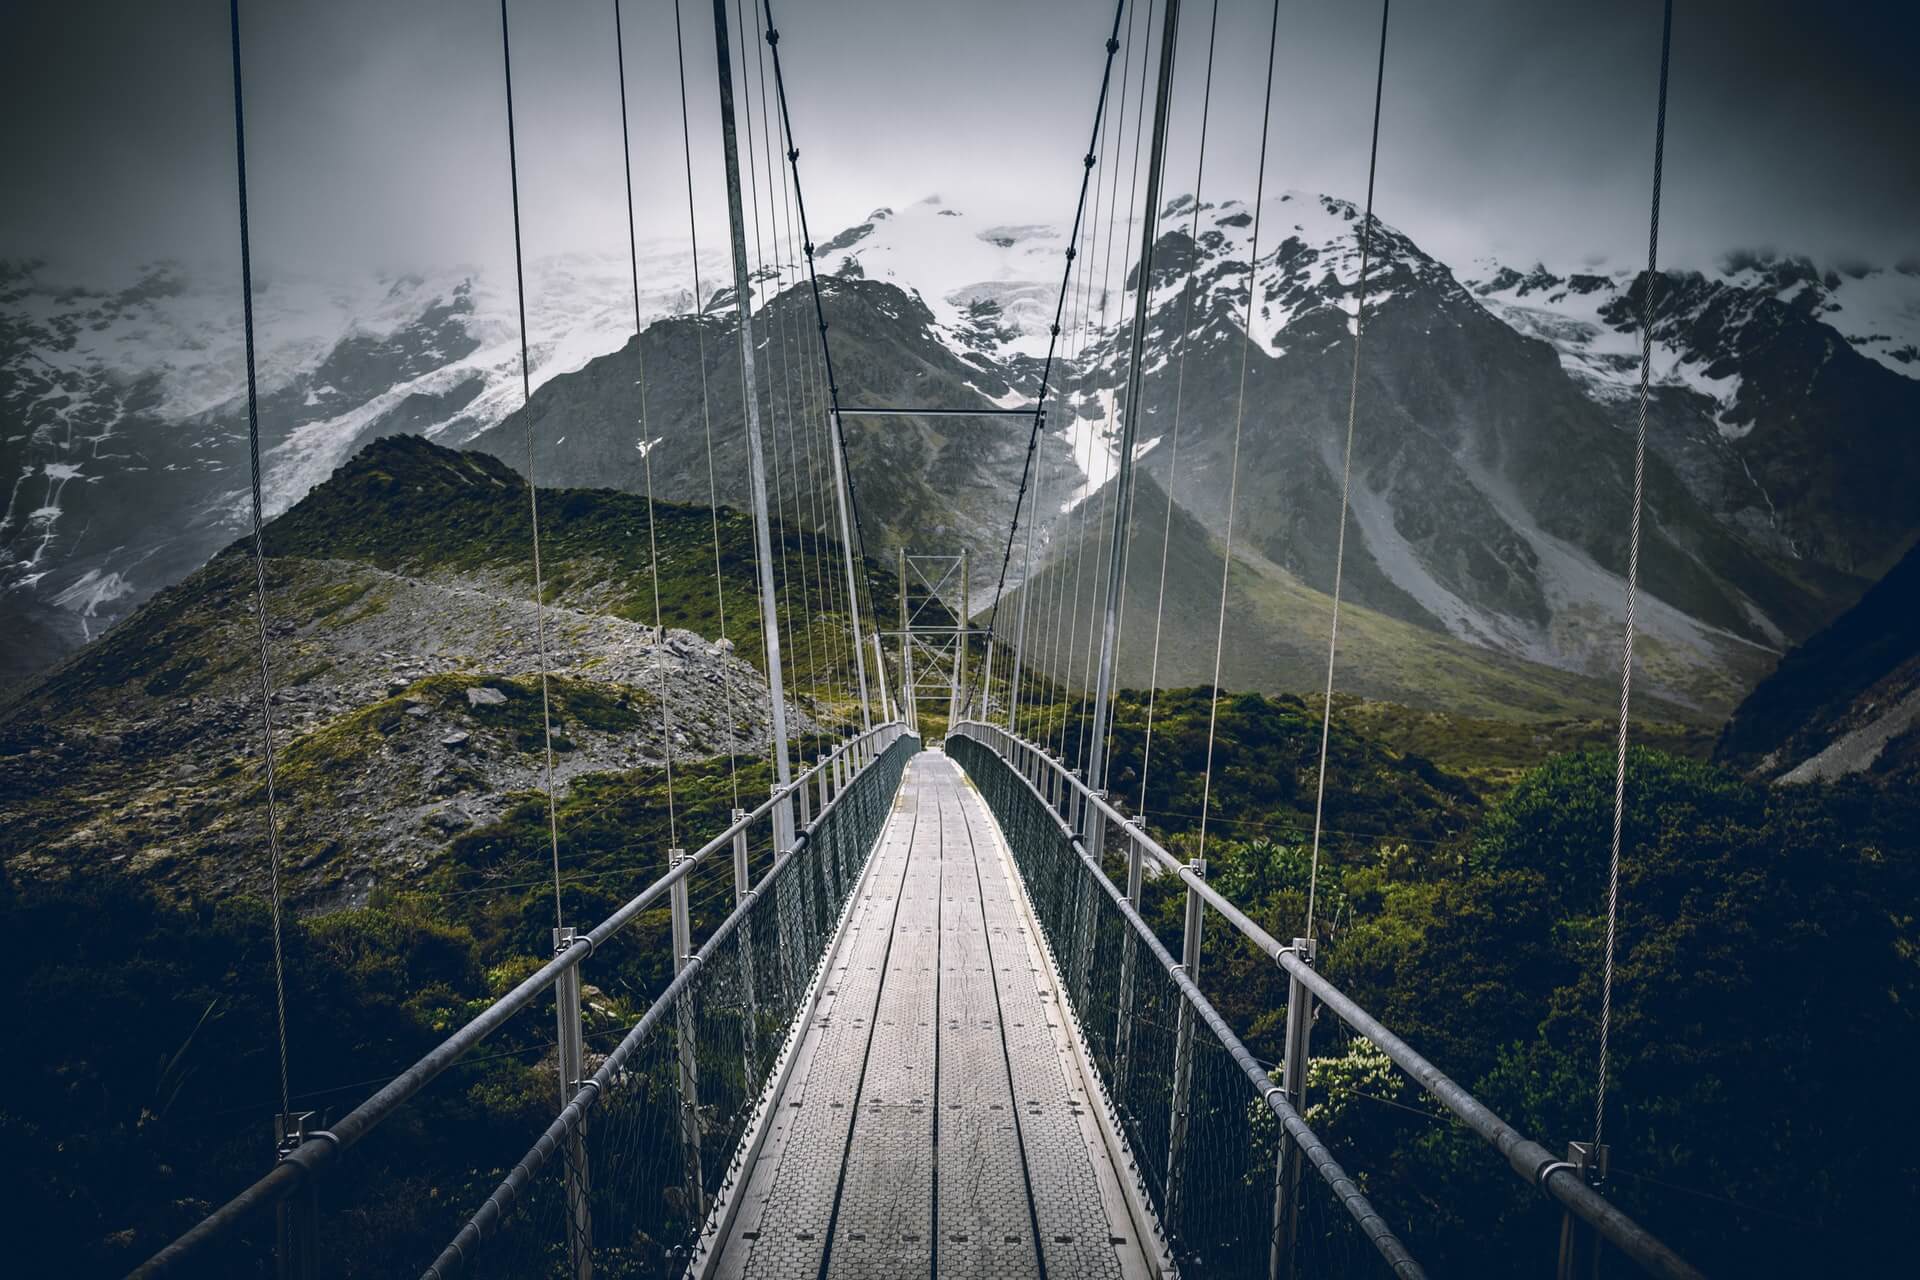 A swing bridge on the Hooker Valley Track - hiking in Aoraki Mount Cook National Park